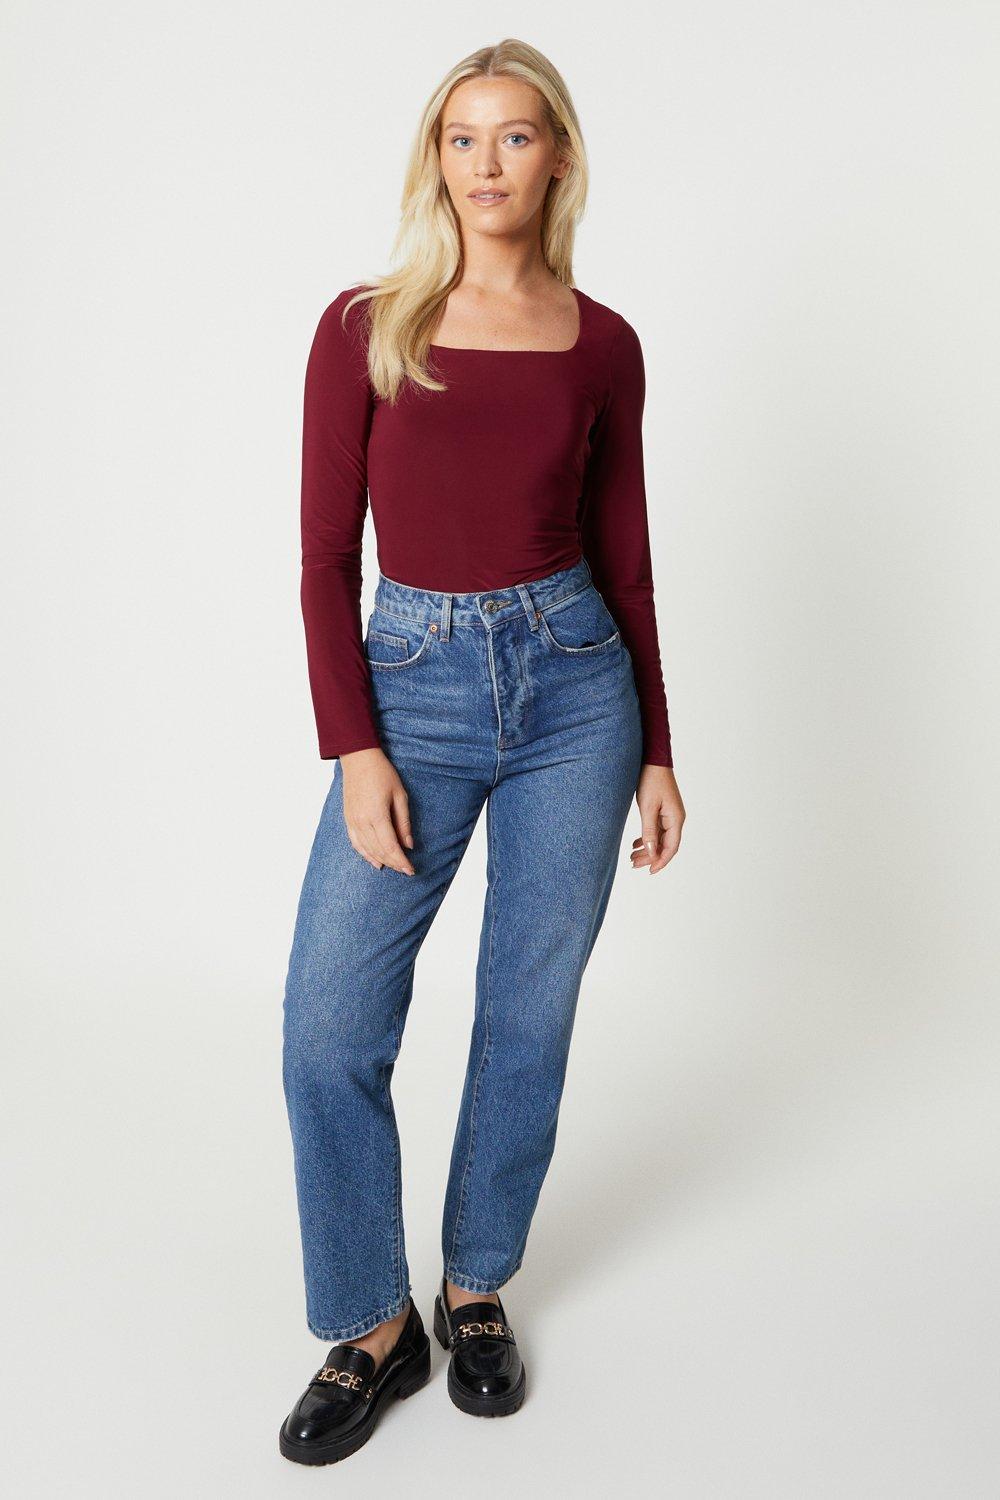 Women’s Double Layer Slinky Square Neck Long Sleeve Top - berry - XL